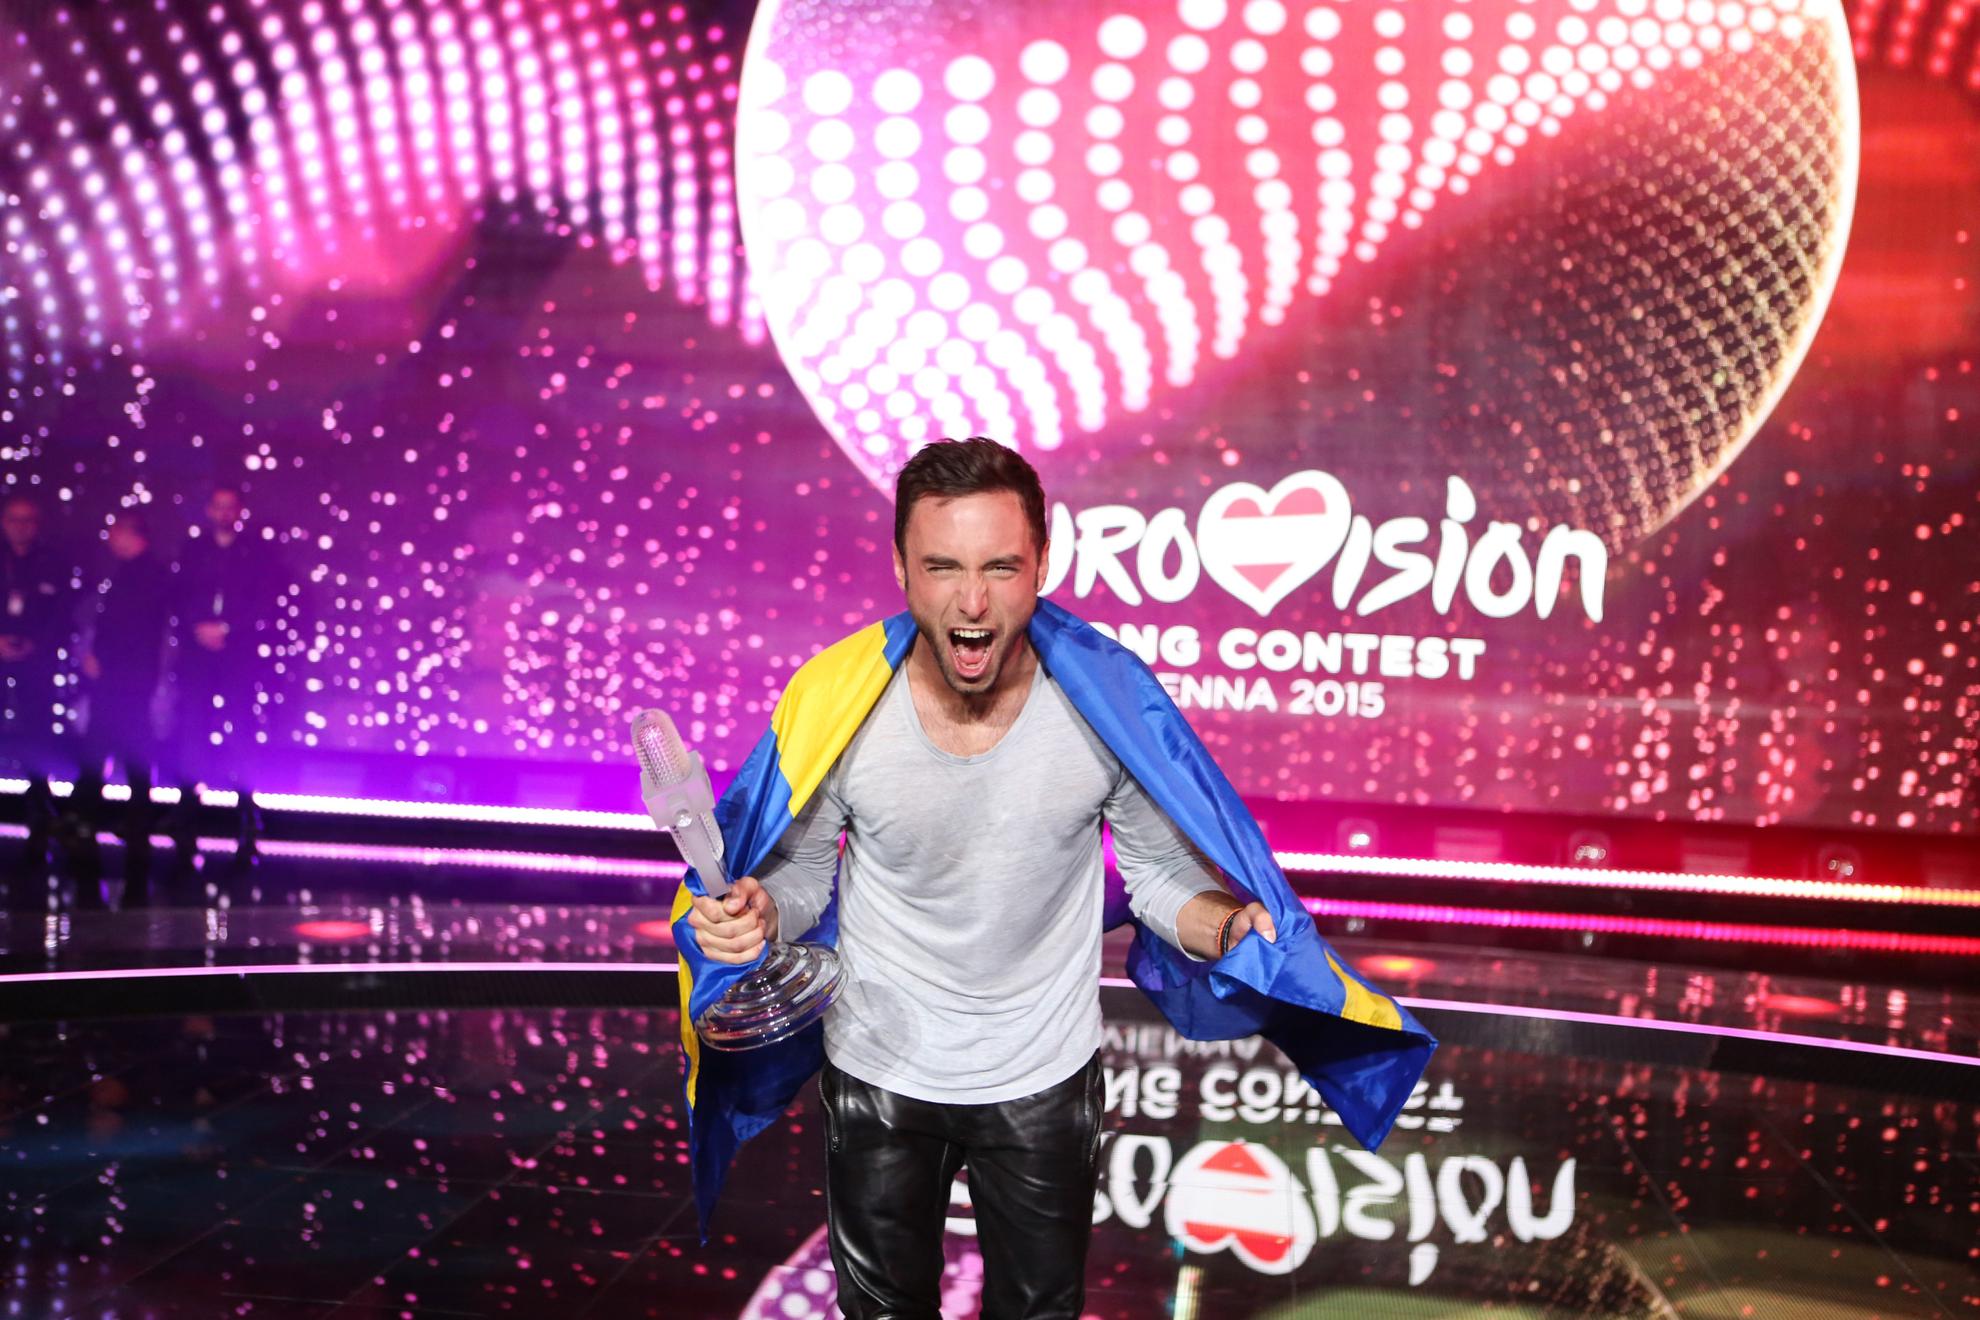 Måns Zelmerlöw at the Eurovision Song Contest in Vienna 2015